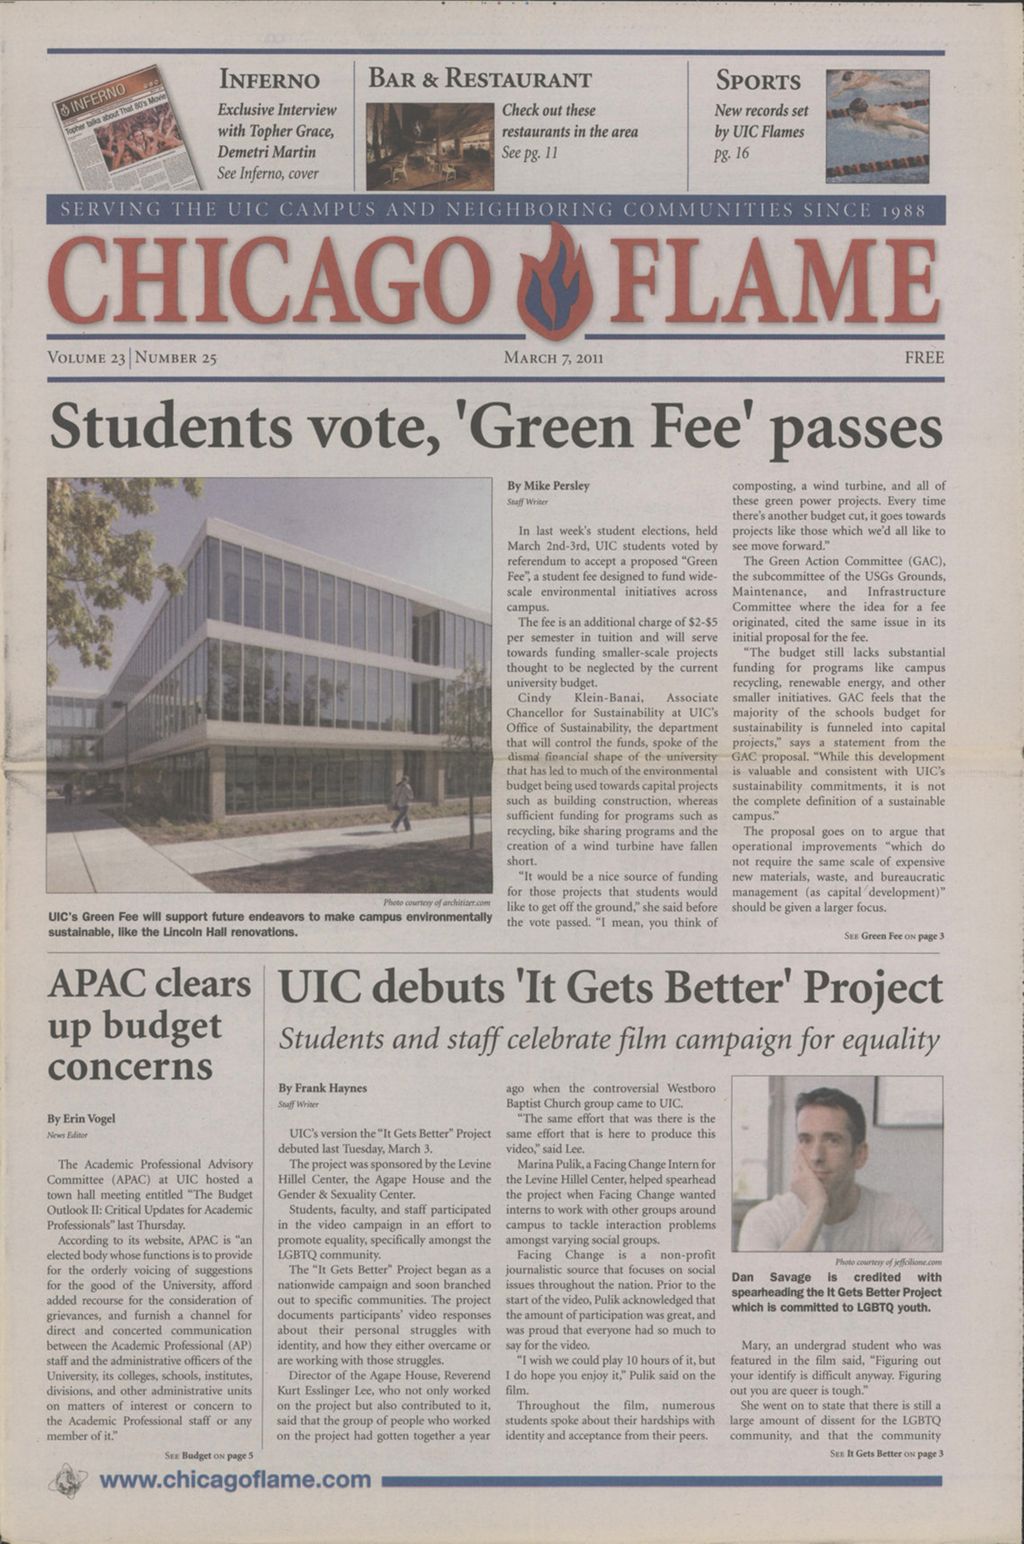 Miniature of Chicago Flame (March 7, 2011)